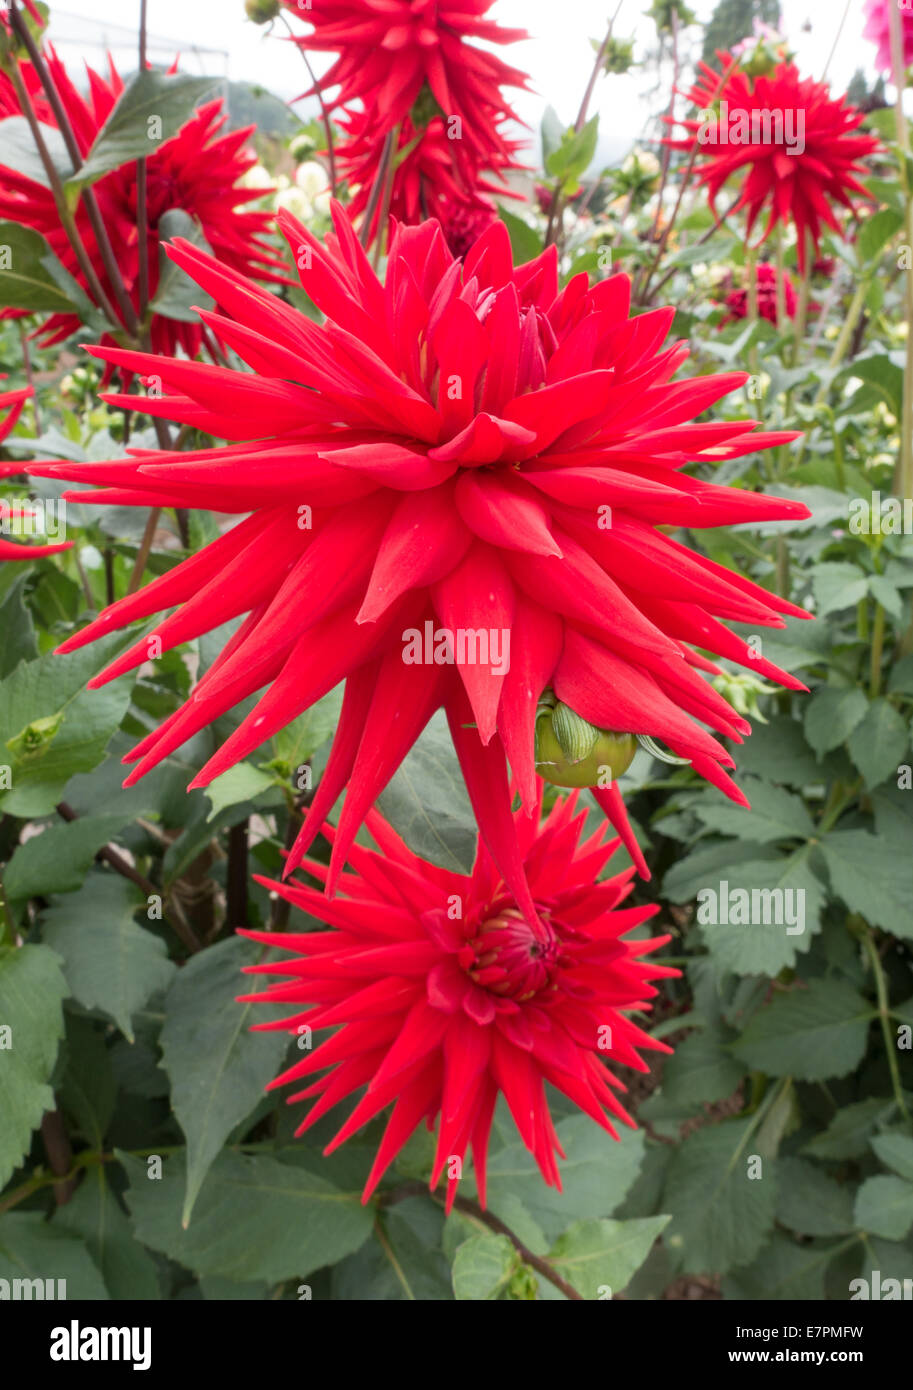 Vivid scarlet red dahlia flowers in an English country garden UK Stock Photo